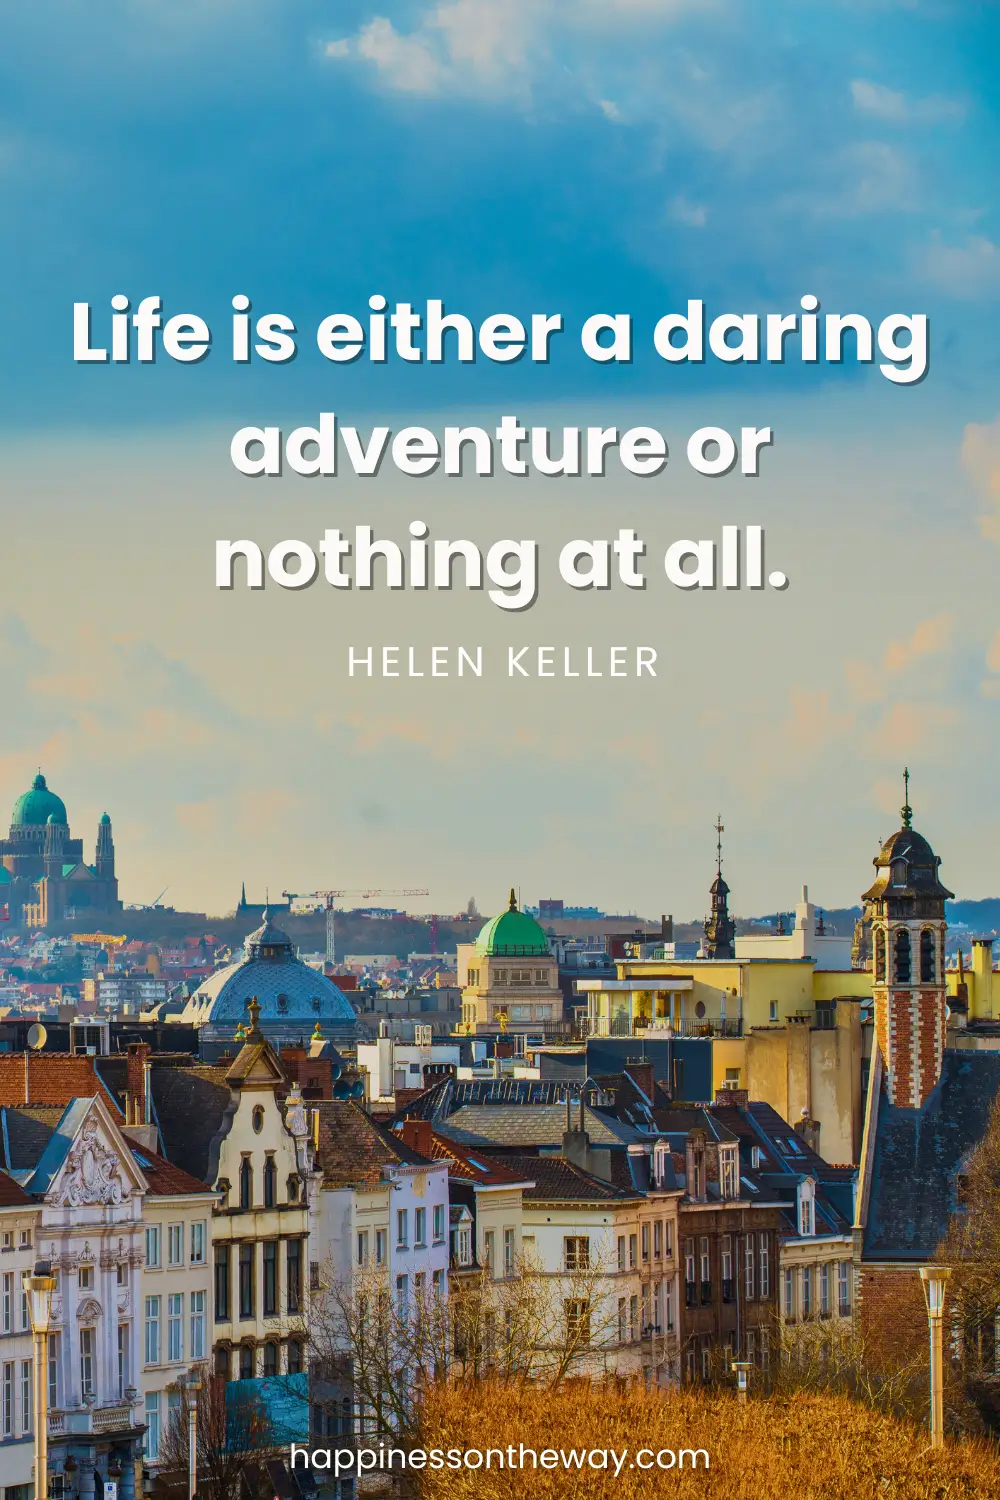 A panoramic view of the old buildings in Belgium with a quote: Life is either a daring adventure or nothing at all by Helen Keller.